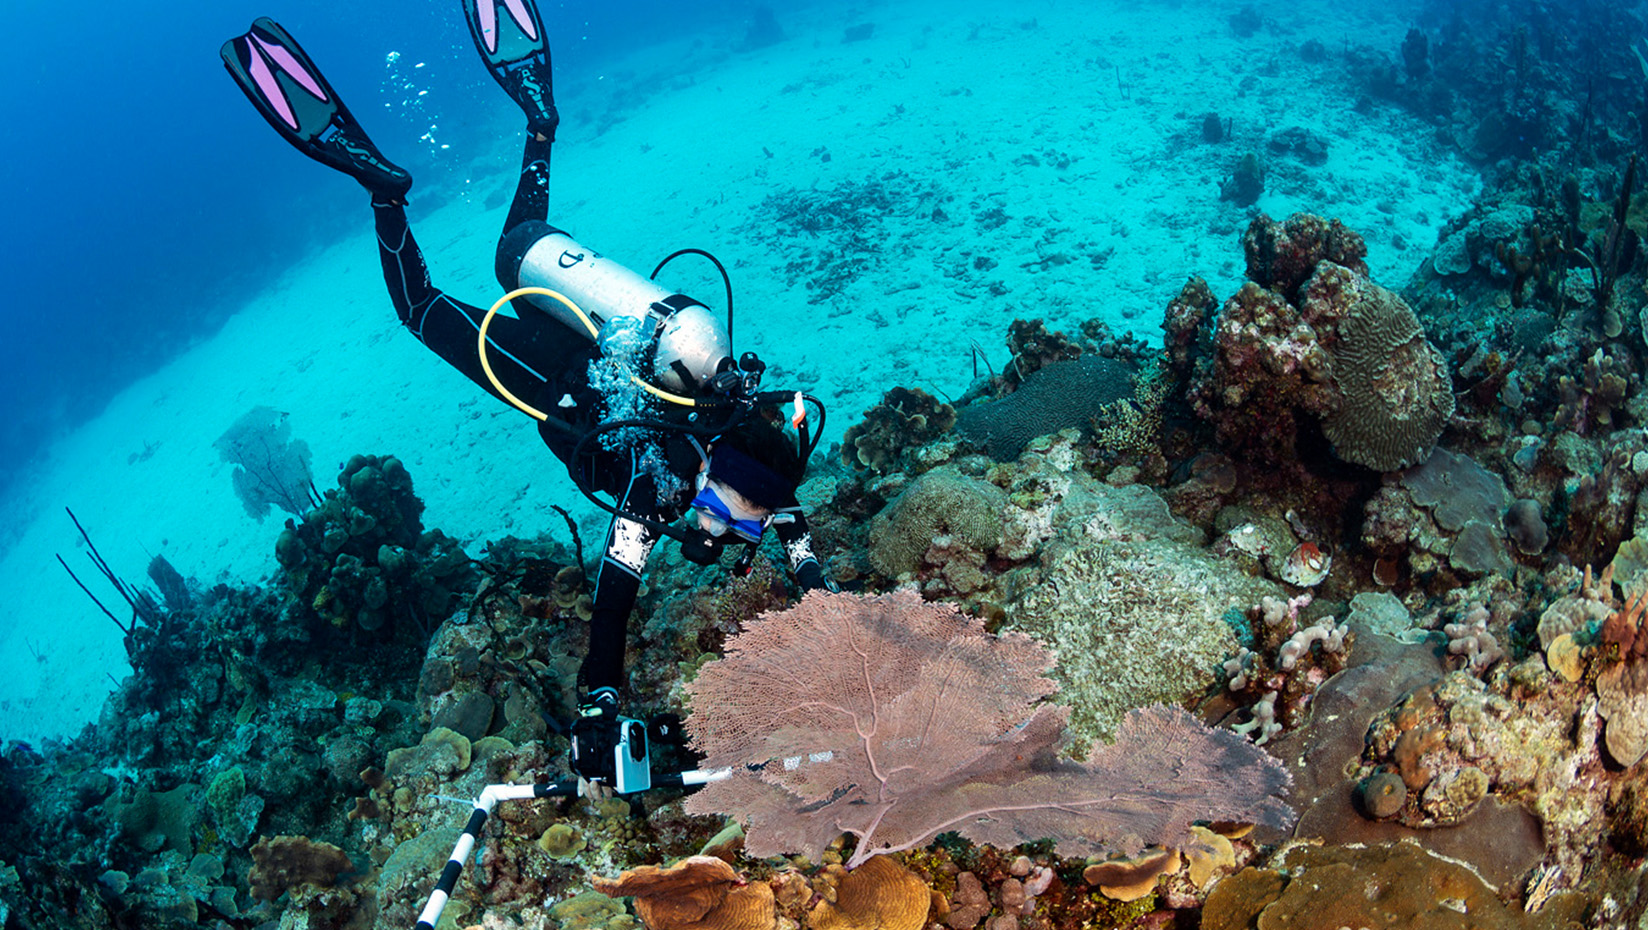 Diver surveys coral reef in the tropical waters off the Dominican Republic.